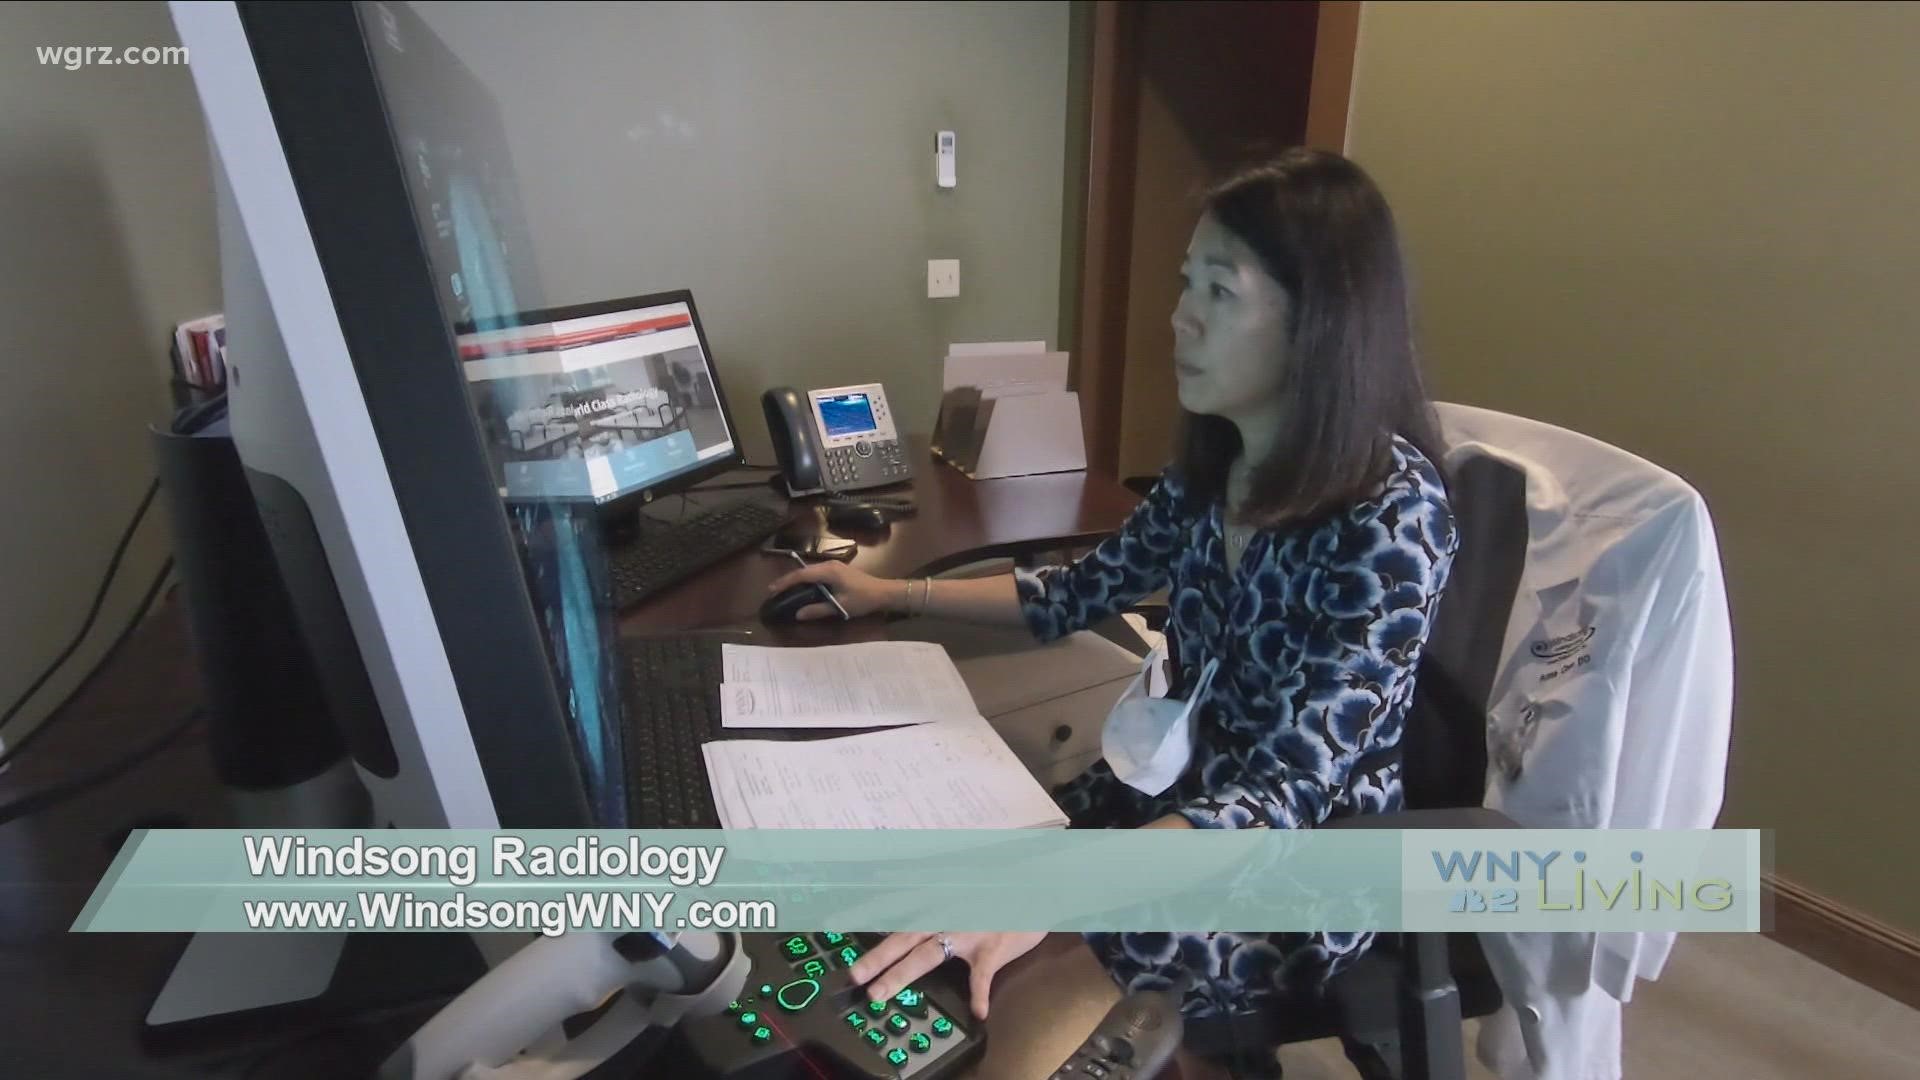 WNY Living - October 2 - Windsong Radiology (THIS VIDEO IS SPONSORED BY WINDSONG RADIOLOGY)